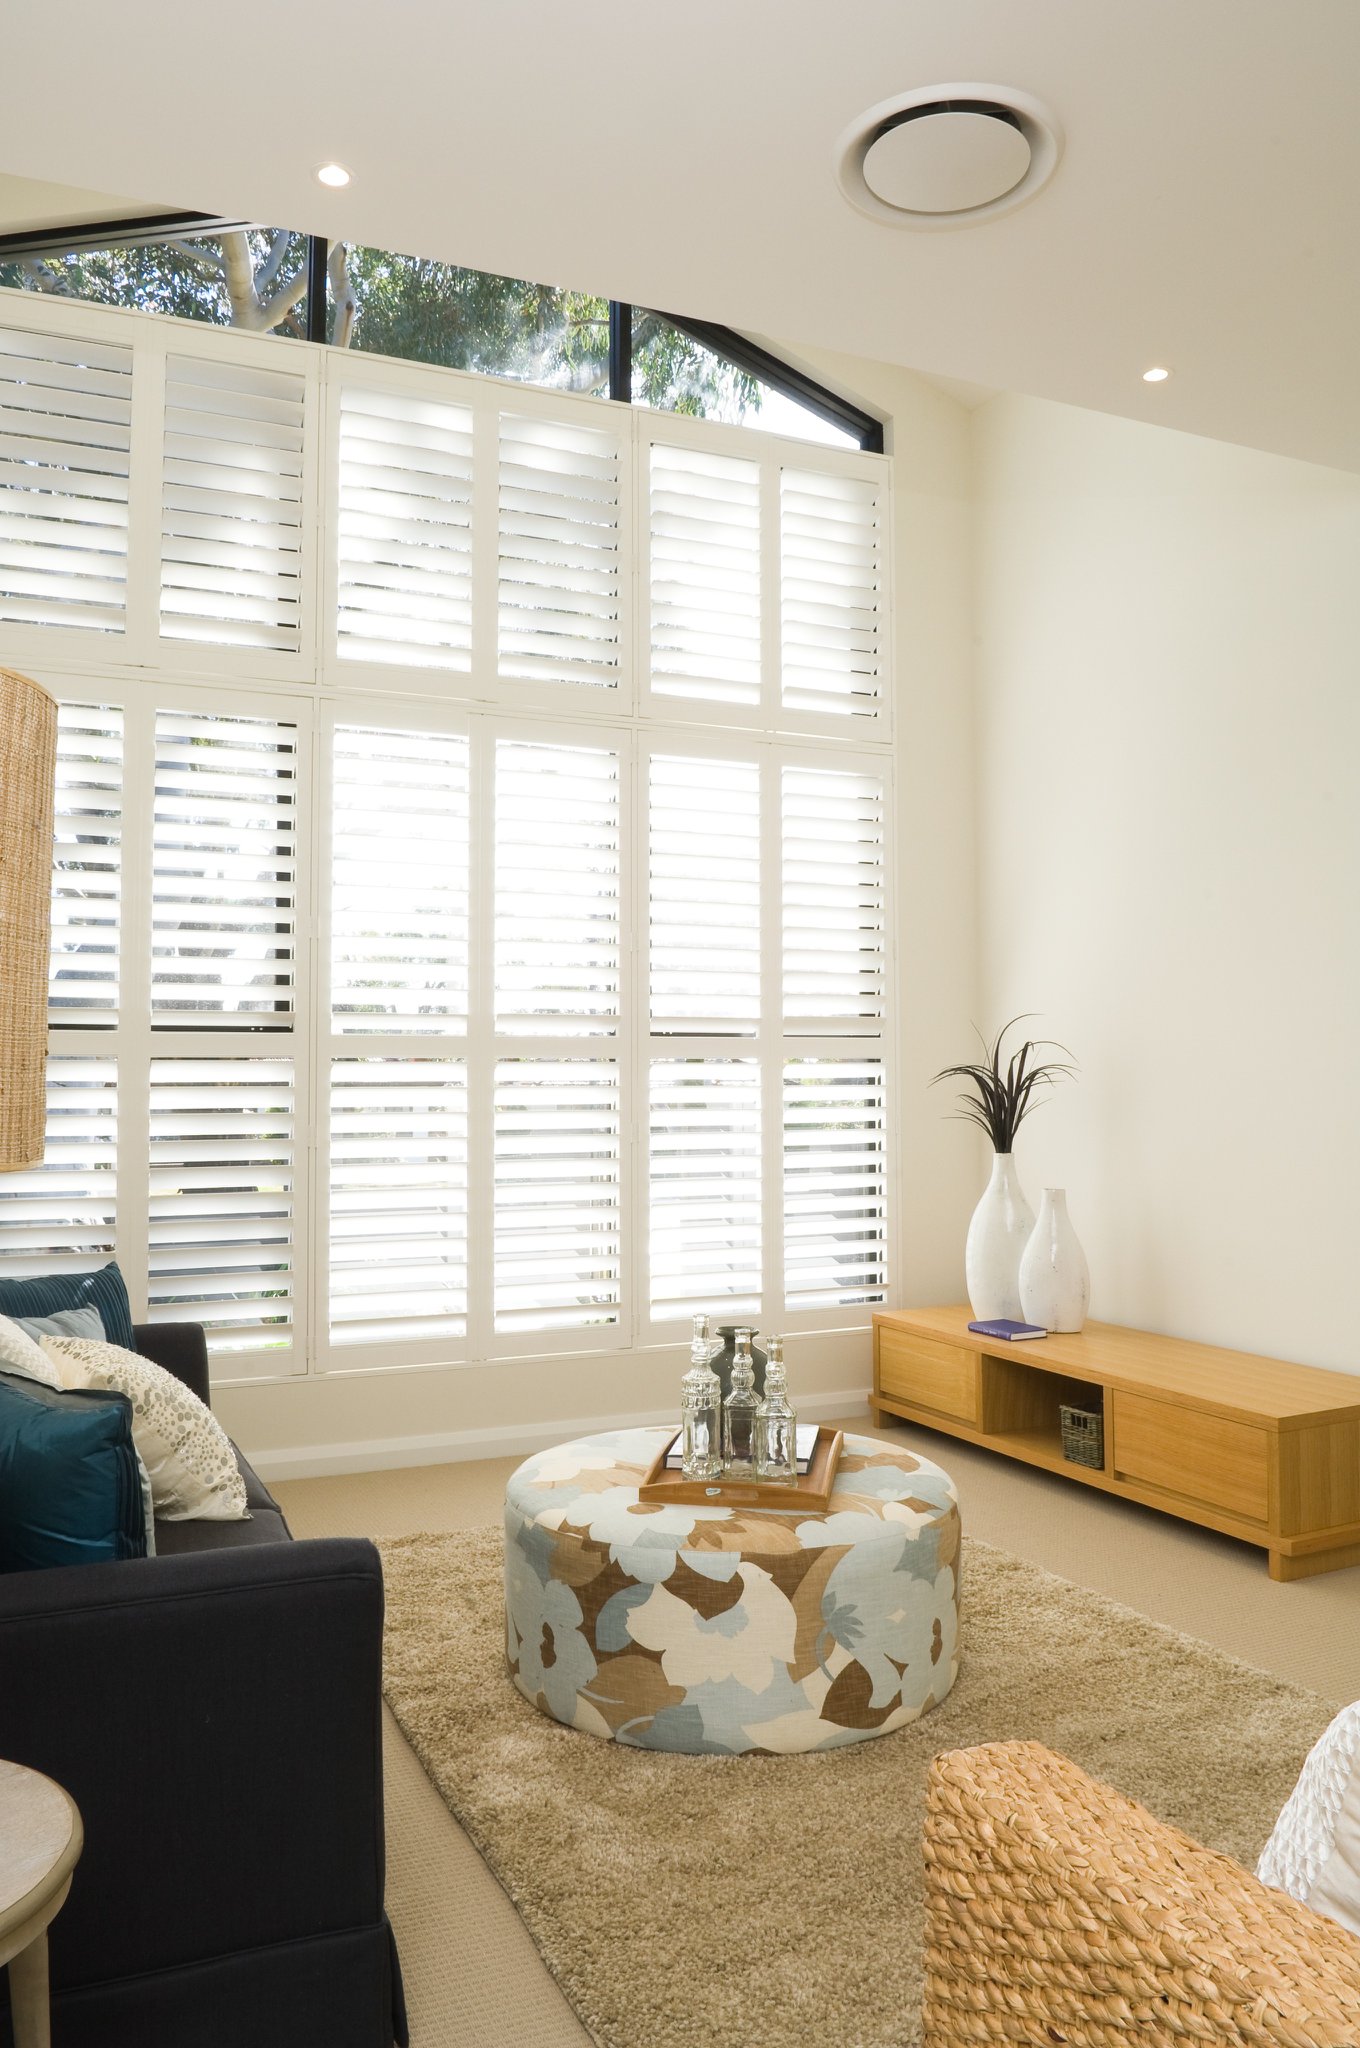 Looking for the easiest way to clean plantation shutters? CLICK HERE to find out!